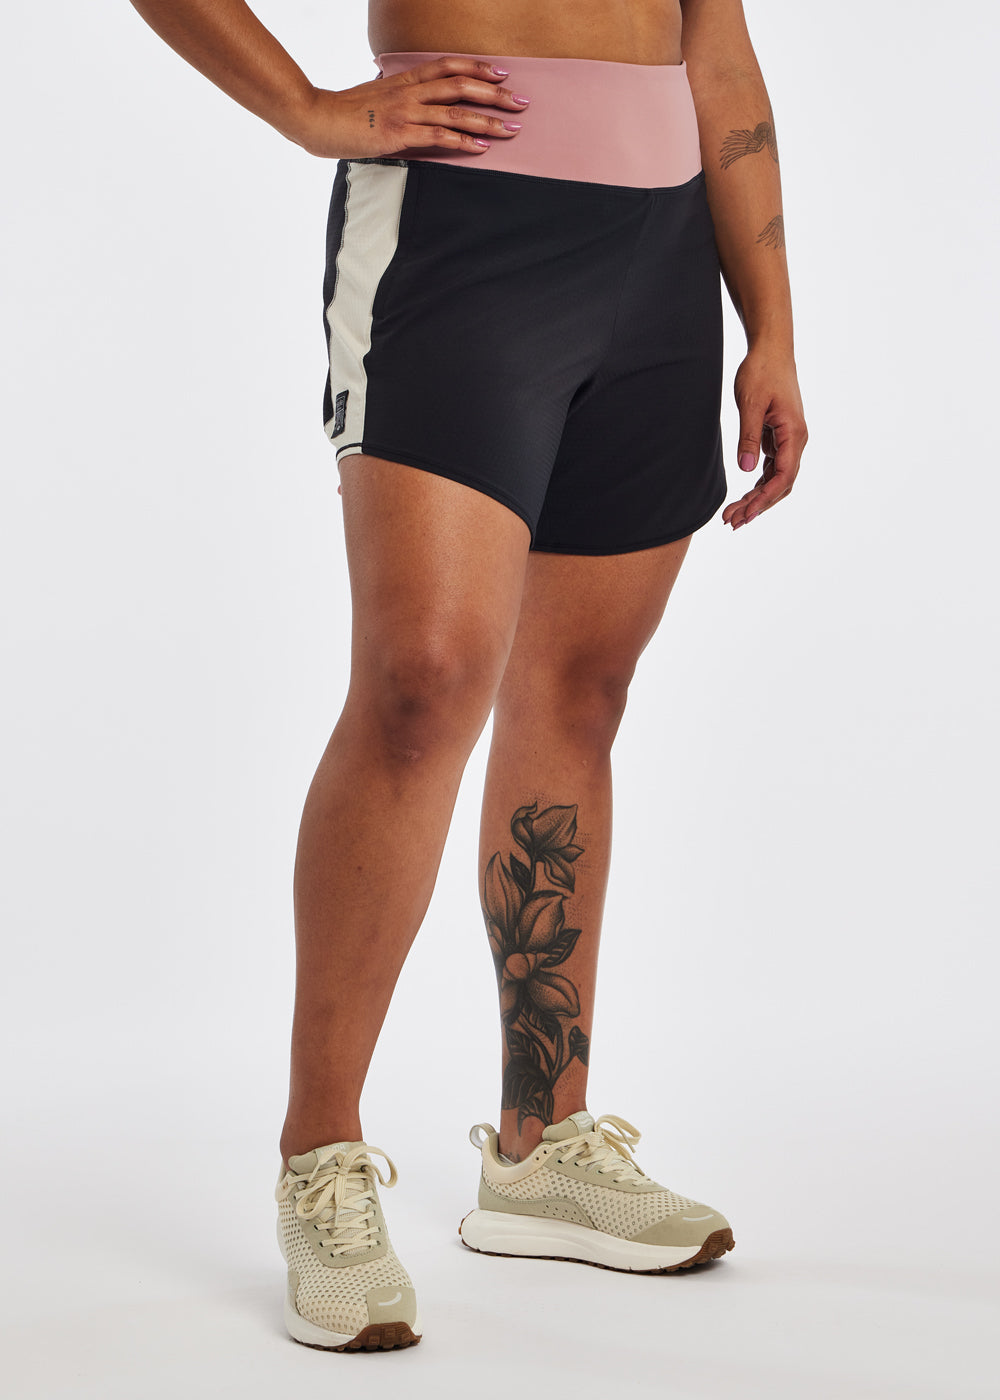 THE GYM PEOPLE Women's High Waisted Bermuda Workout Shorts Long Hiking  Running Shorts with Zipper Pockets Black at  Women's Clothing store